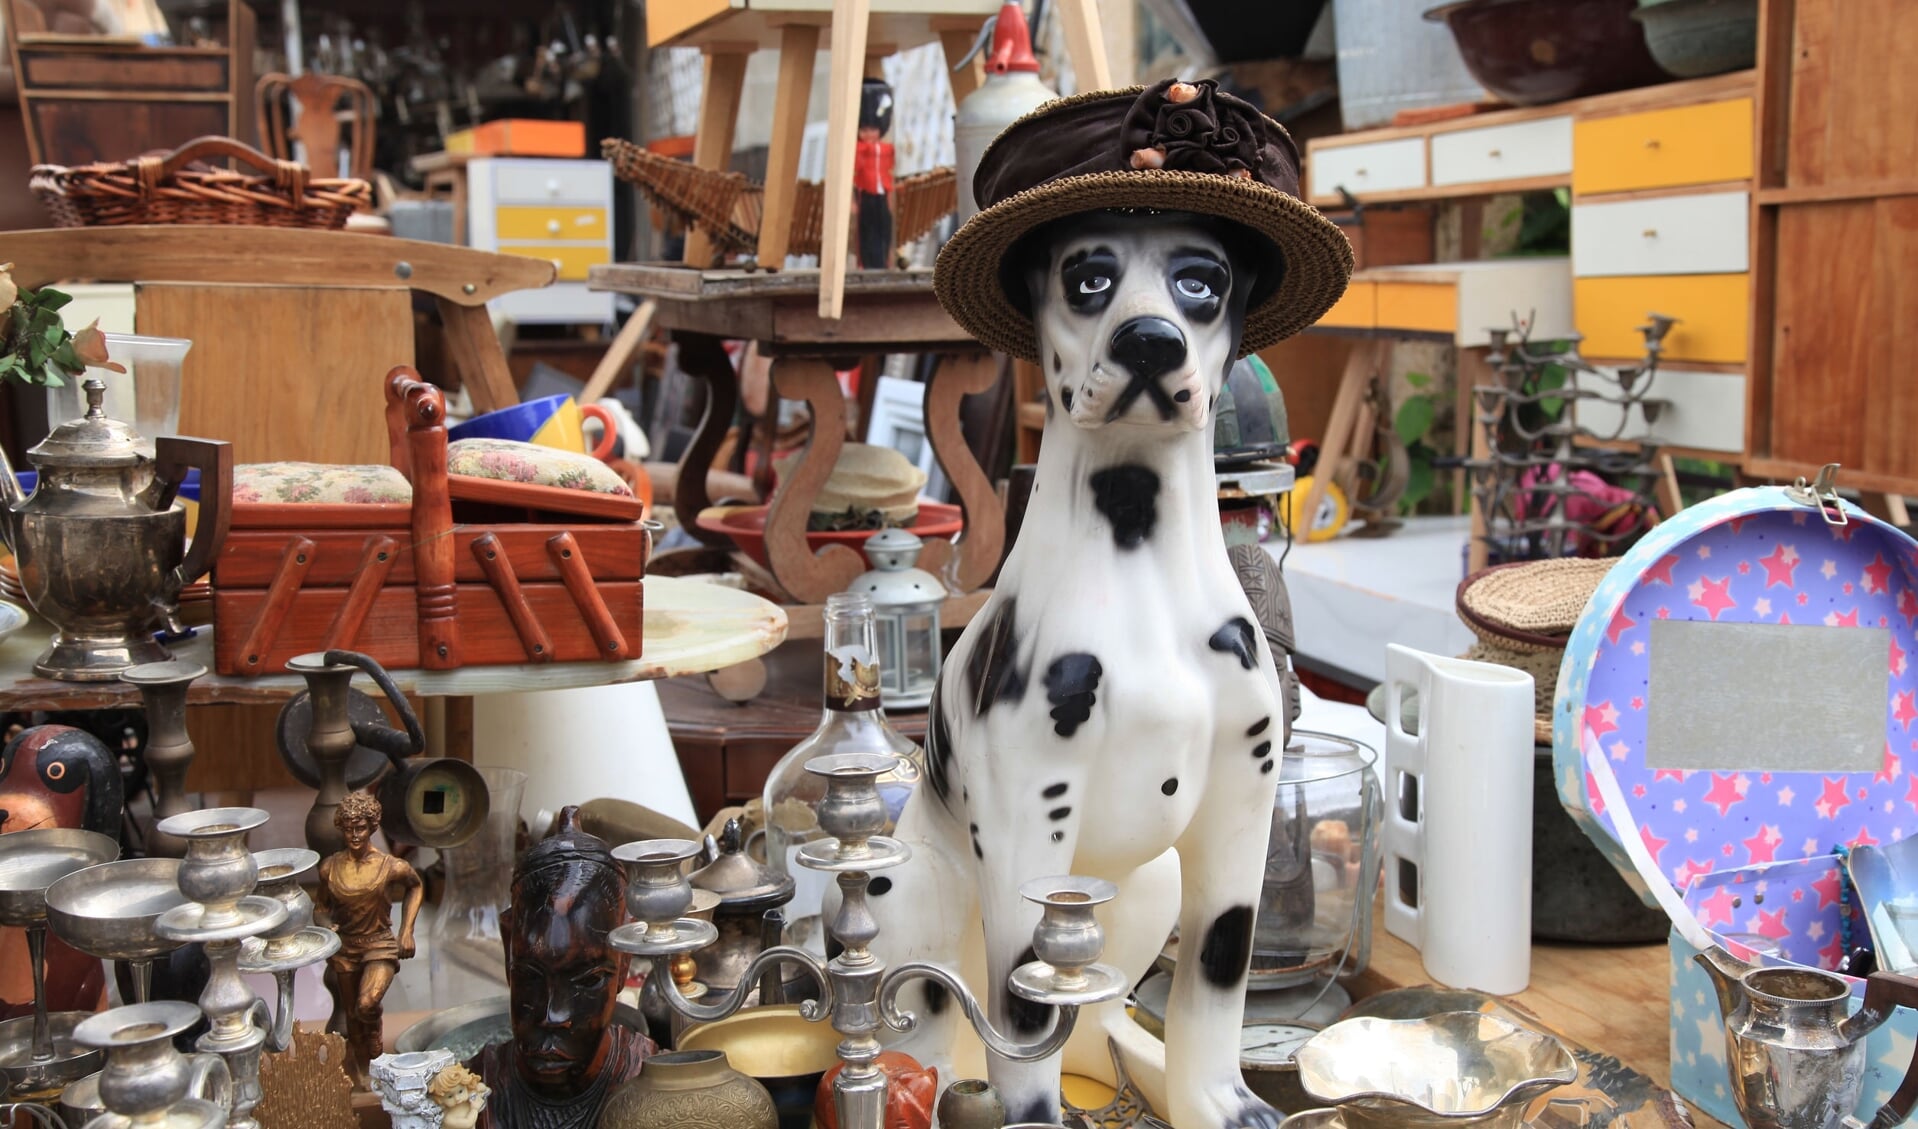 55941519 - old vintage objects and furniture for sale at a flea market. toy vintage dog. selective focus